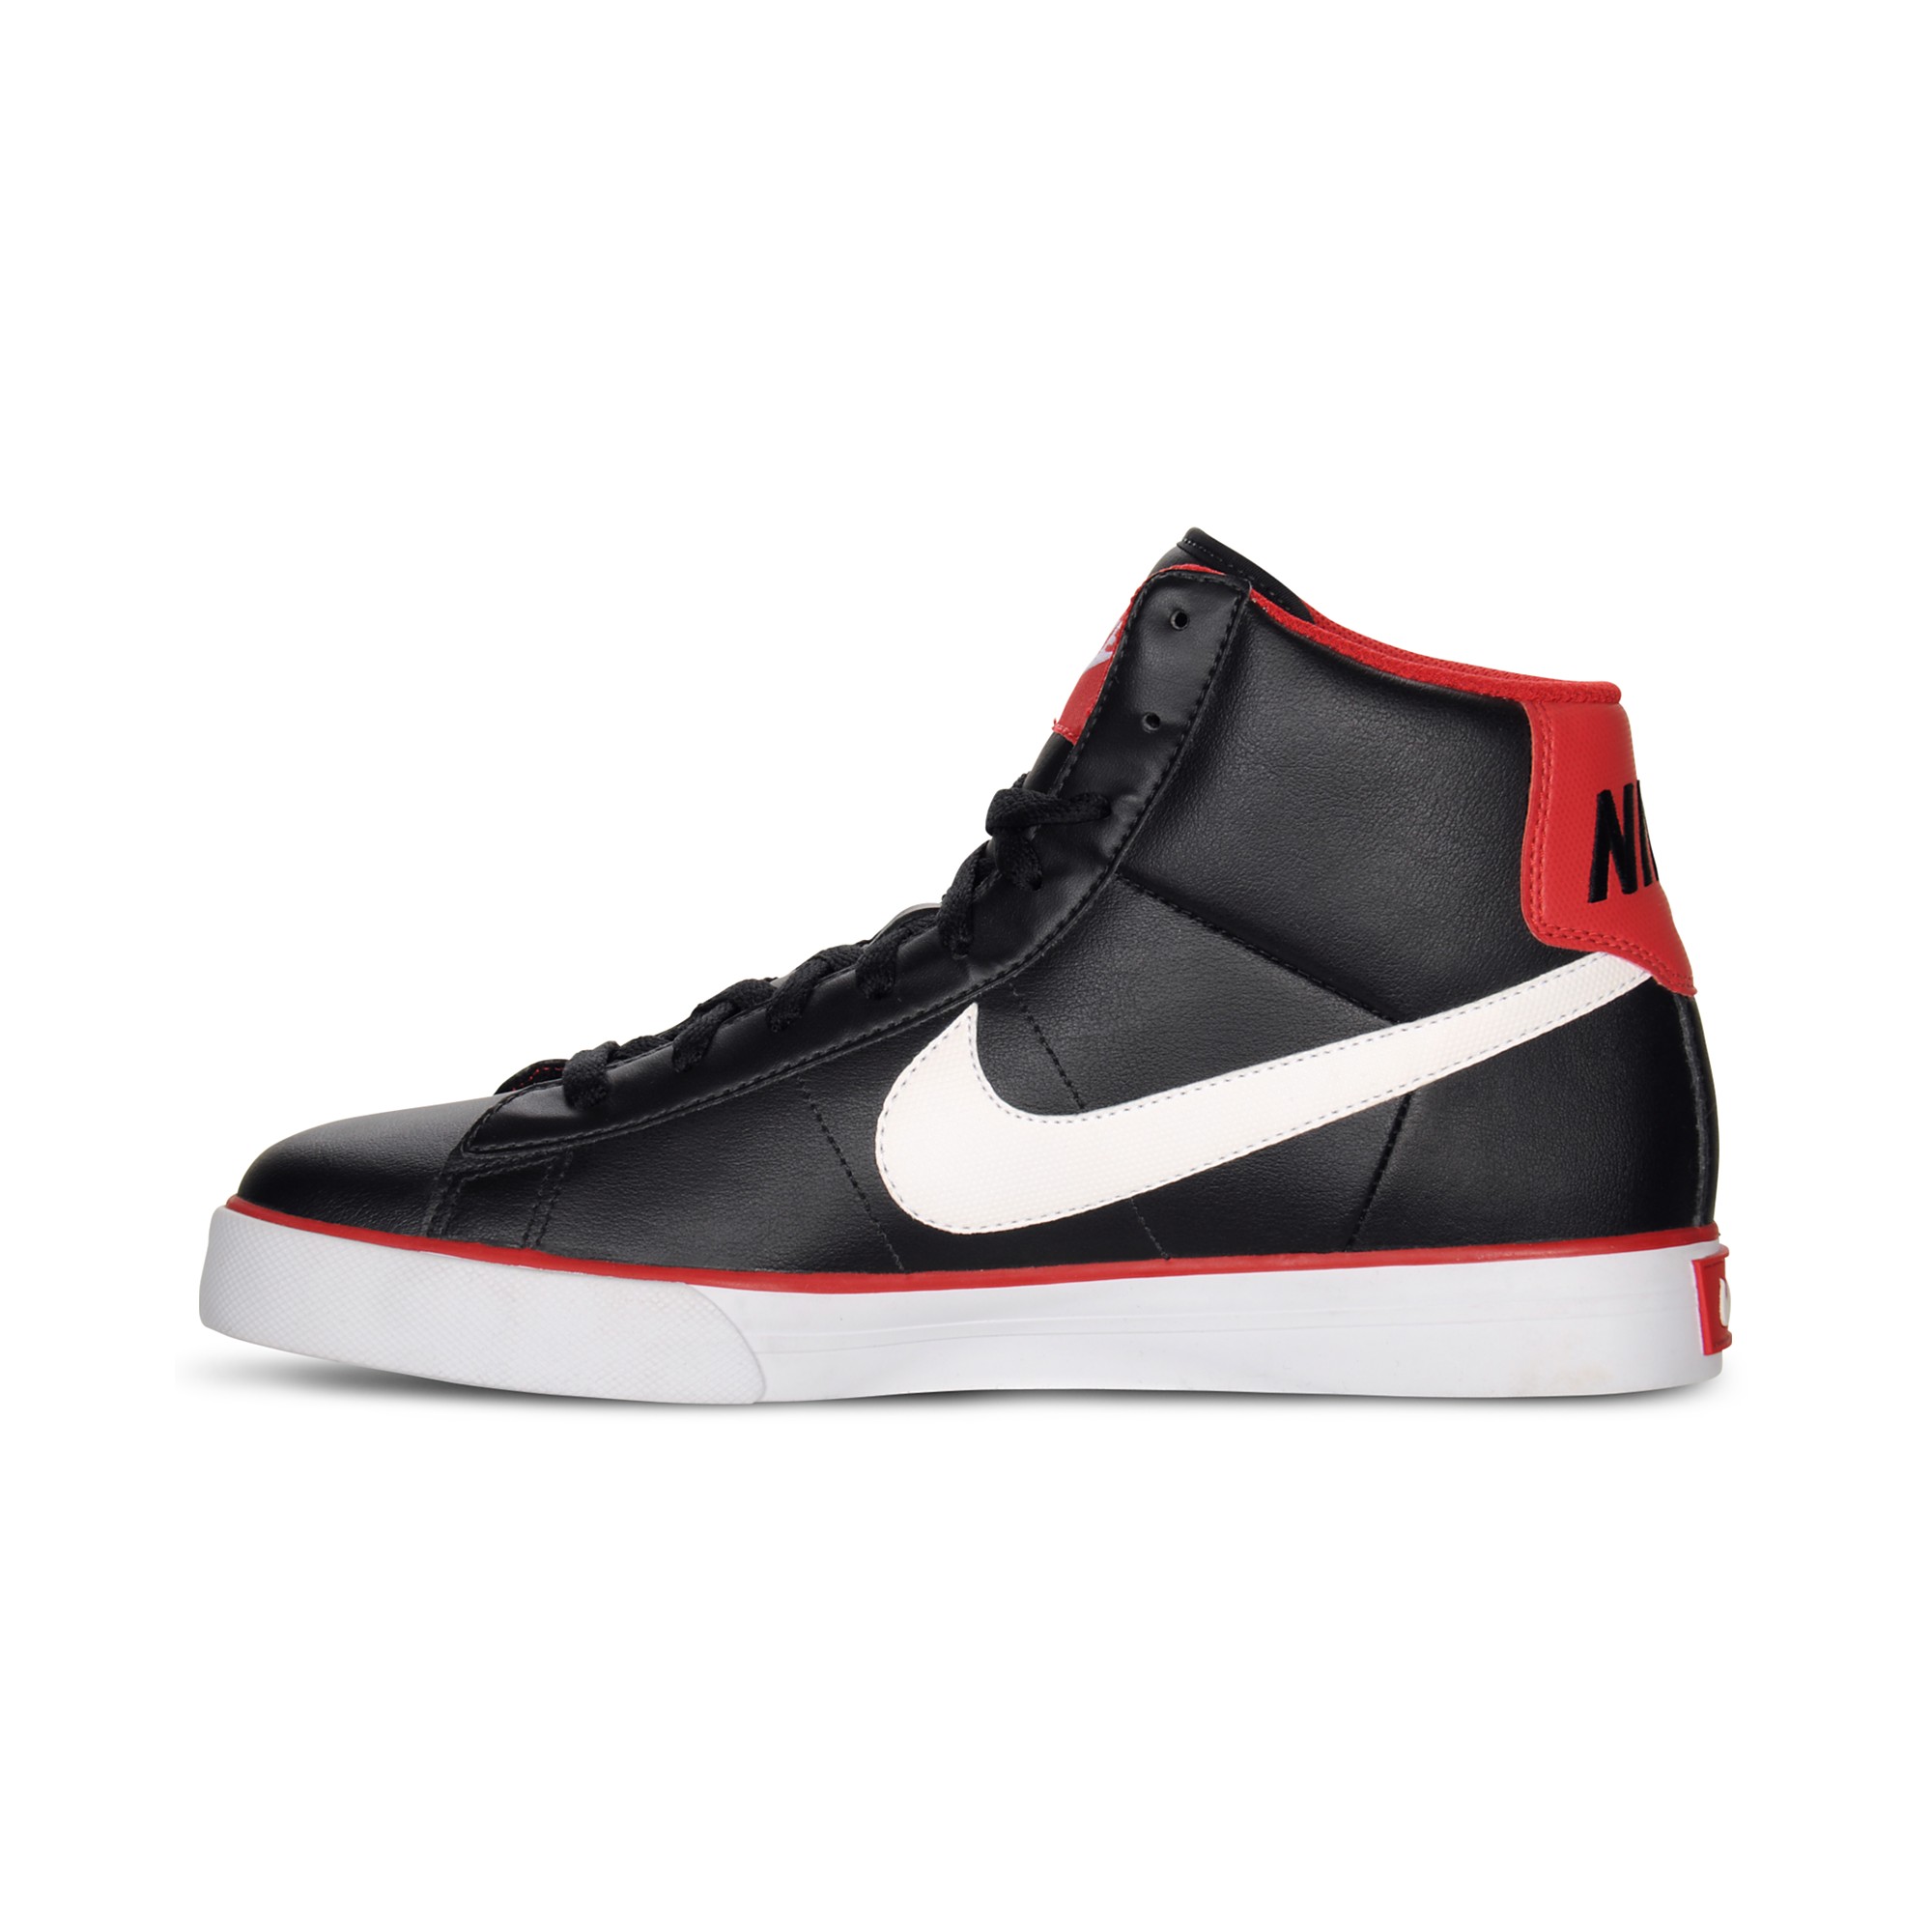 Lyst - Nike Sweet Classic Leather High Top Sneakers in Black for Men